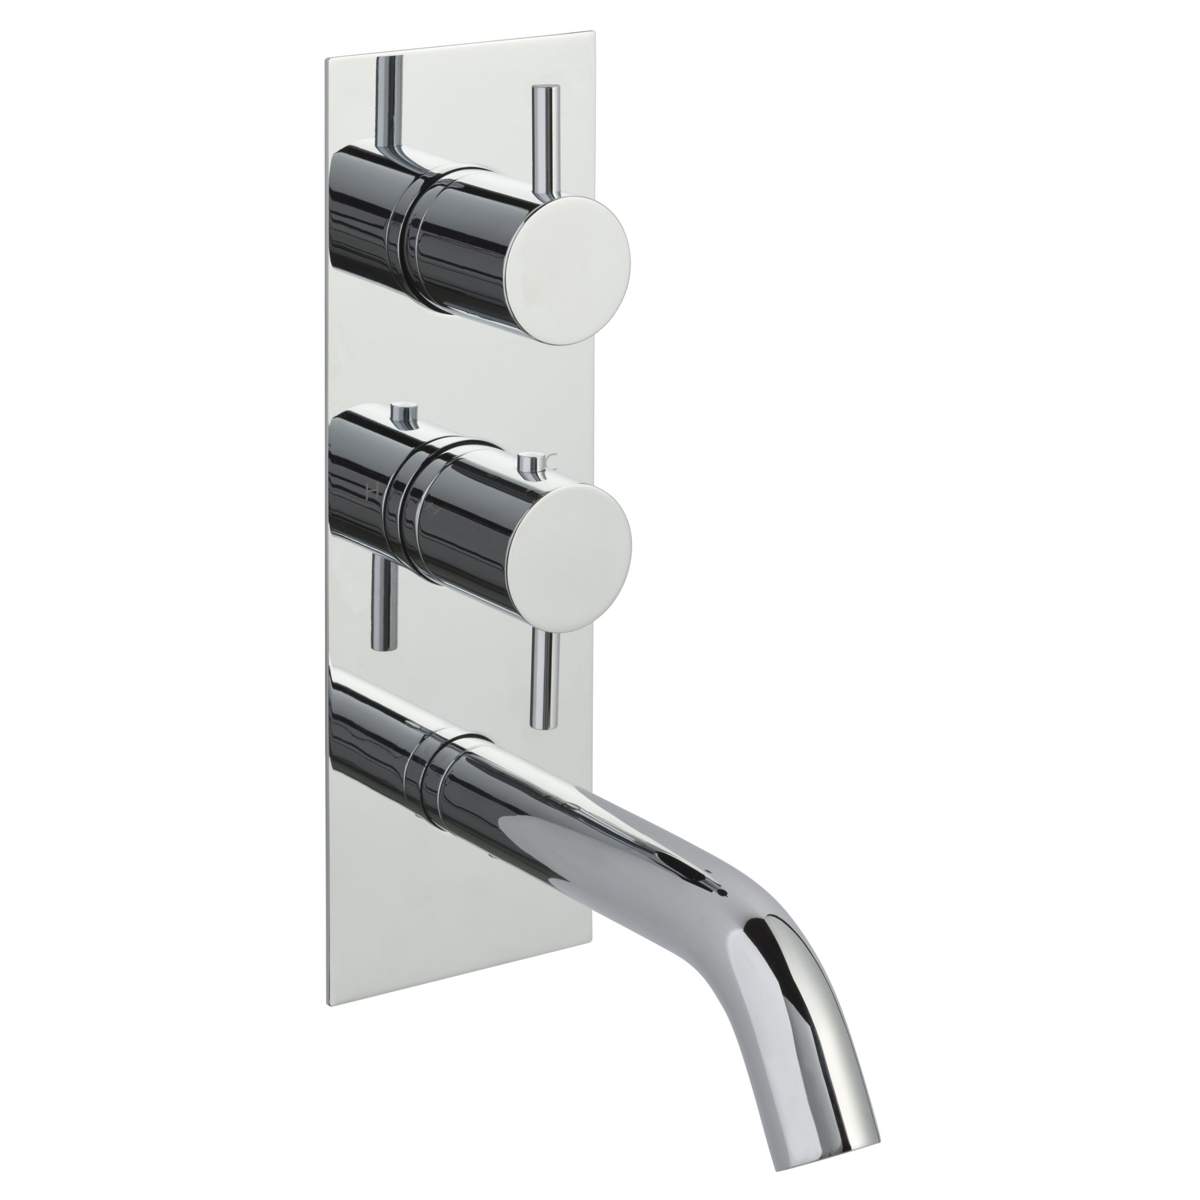 JTP Florence Thermostatic Concealed 2 Outlet Shower Valve with Spout